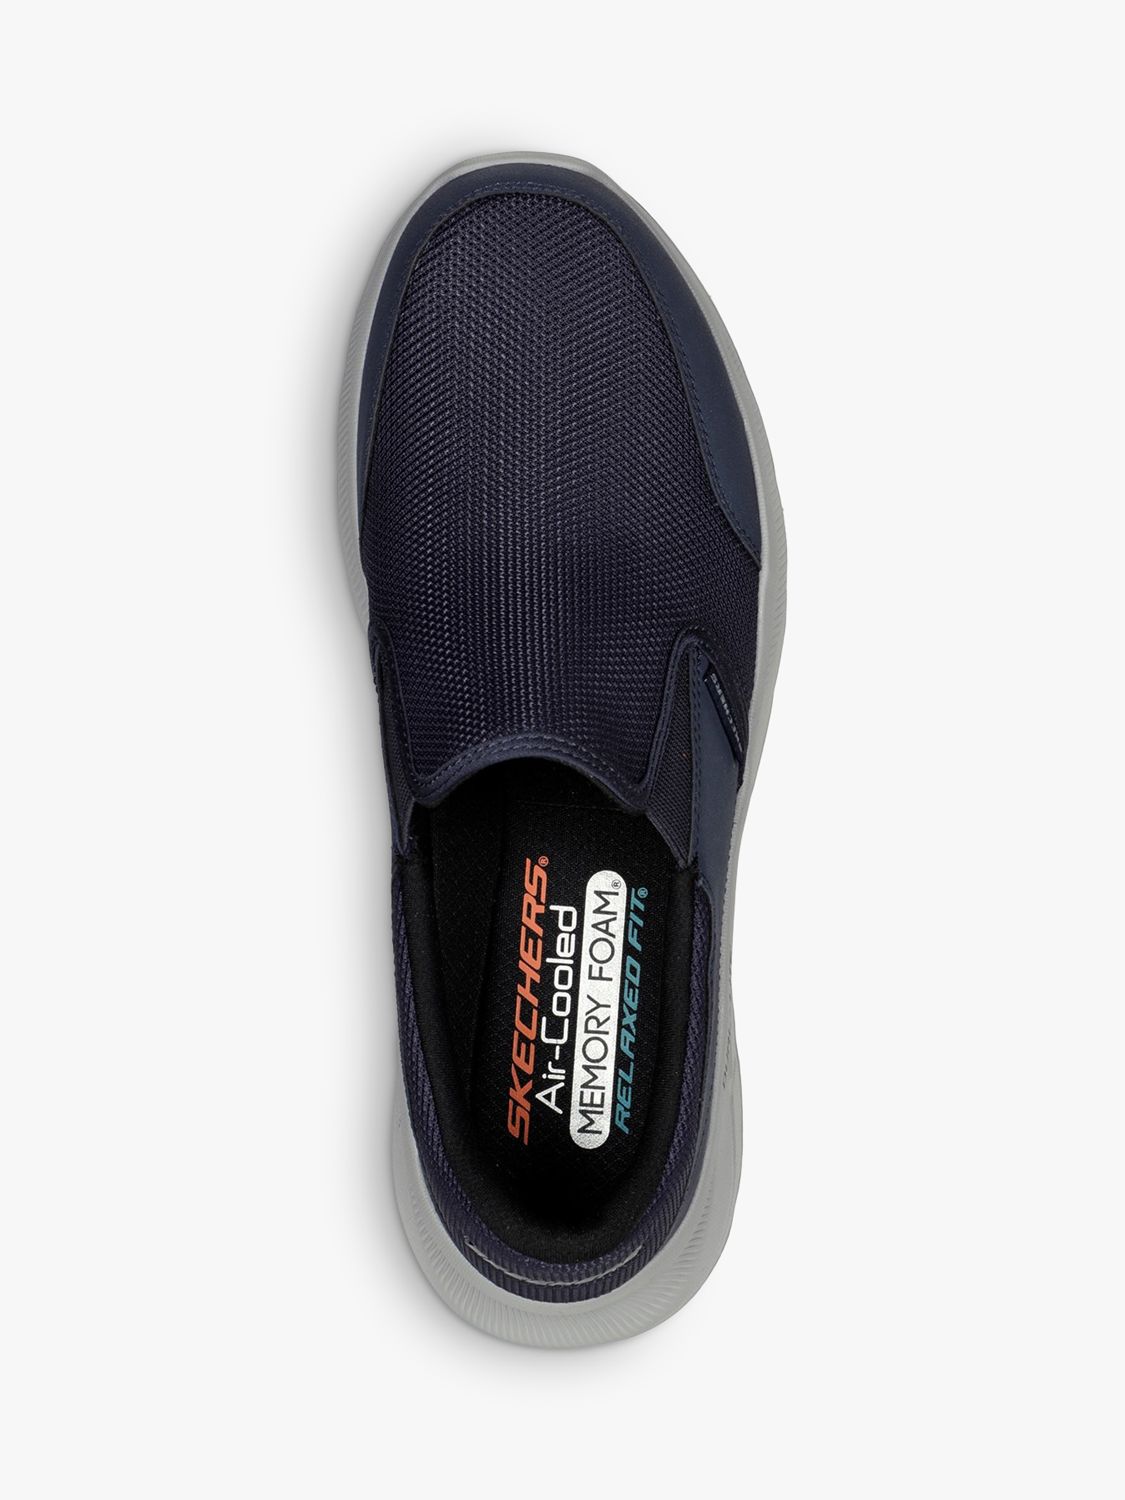 Skechers Equalizer 5.0 Persistable Slip On Trainers, Navy, 6